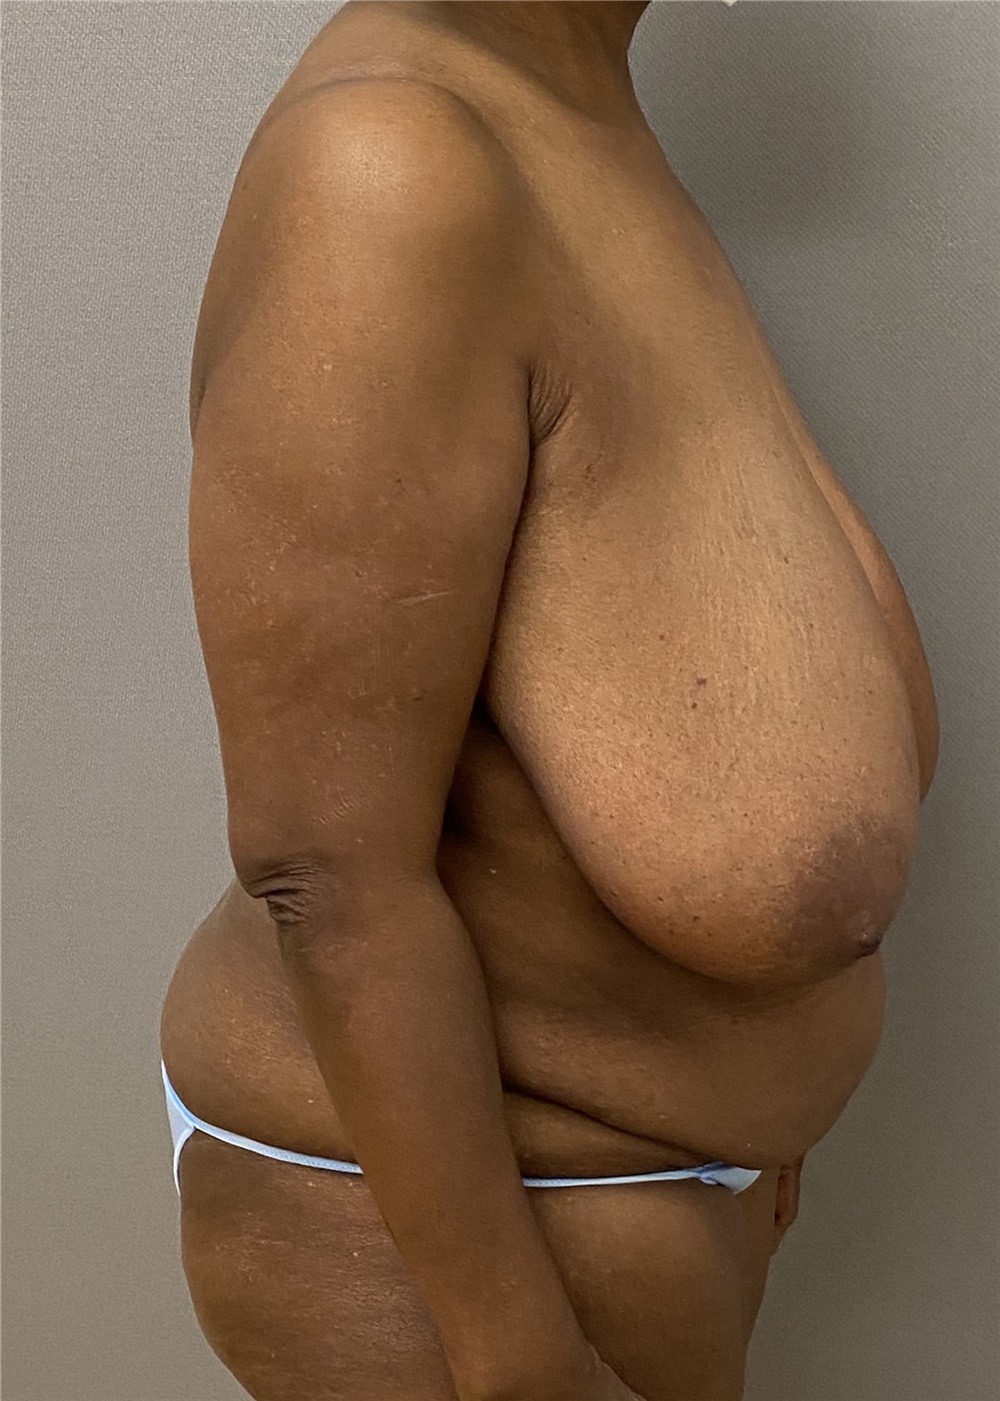 Breast Reduction Before and After Photos by Keshav Magge, MD